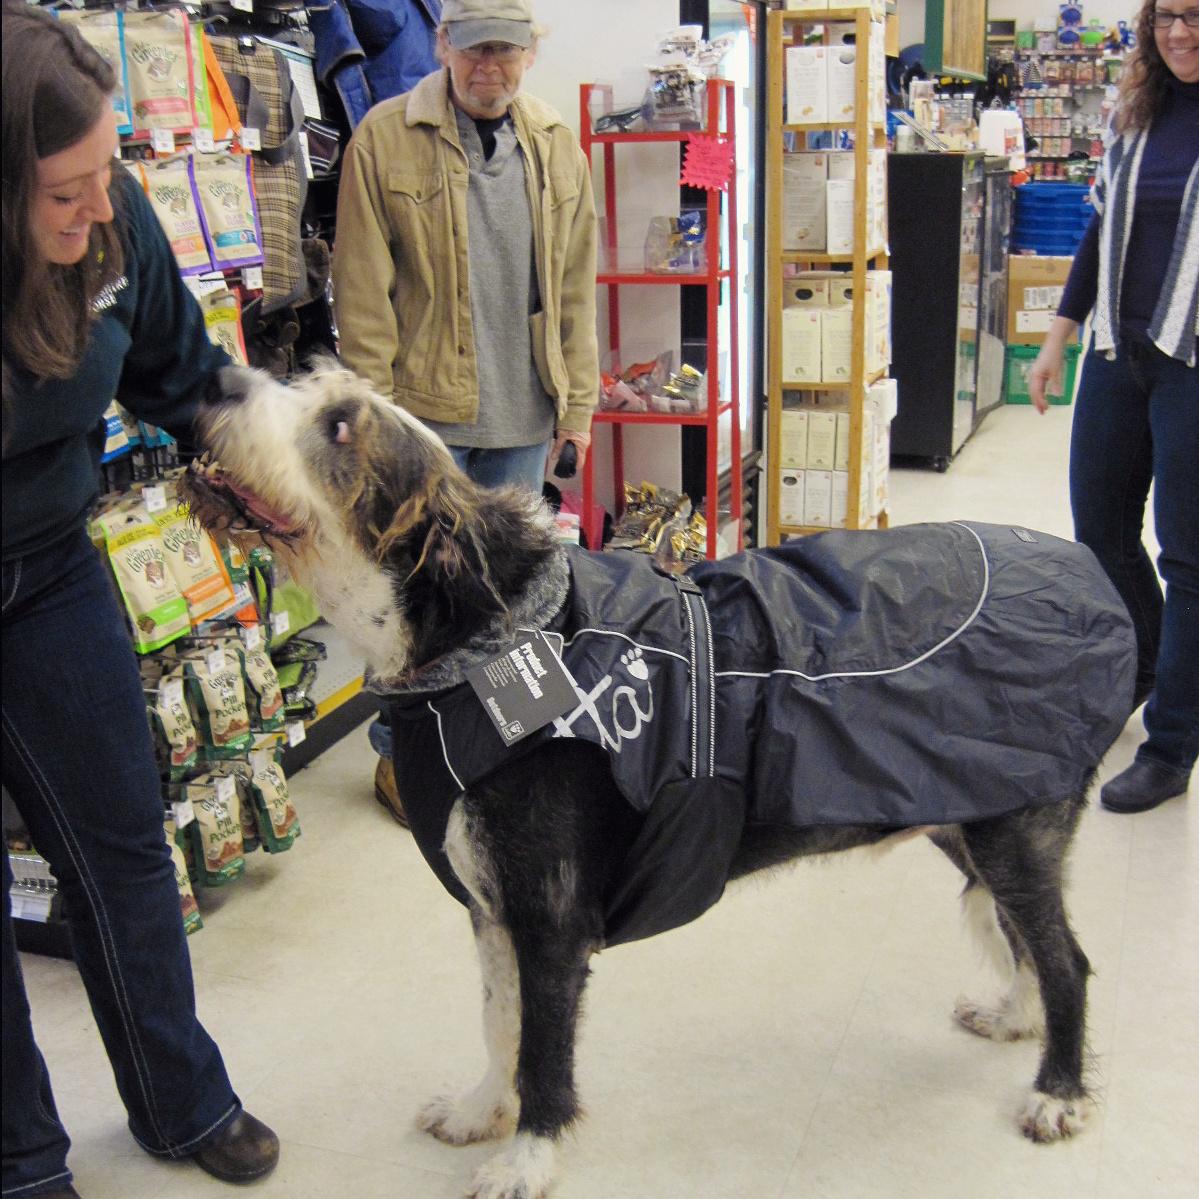 Cheshire Horse On Twitter This Caninecustomer Bought The Largest Hurtta Dog Coat We Carry He S A Great Dane Irish Wolfhound Mix Http T Co Hqa9idgzkw